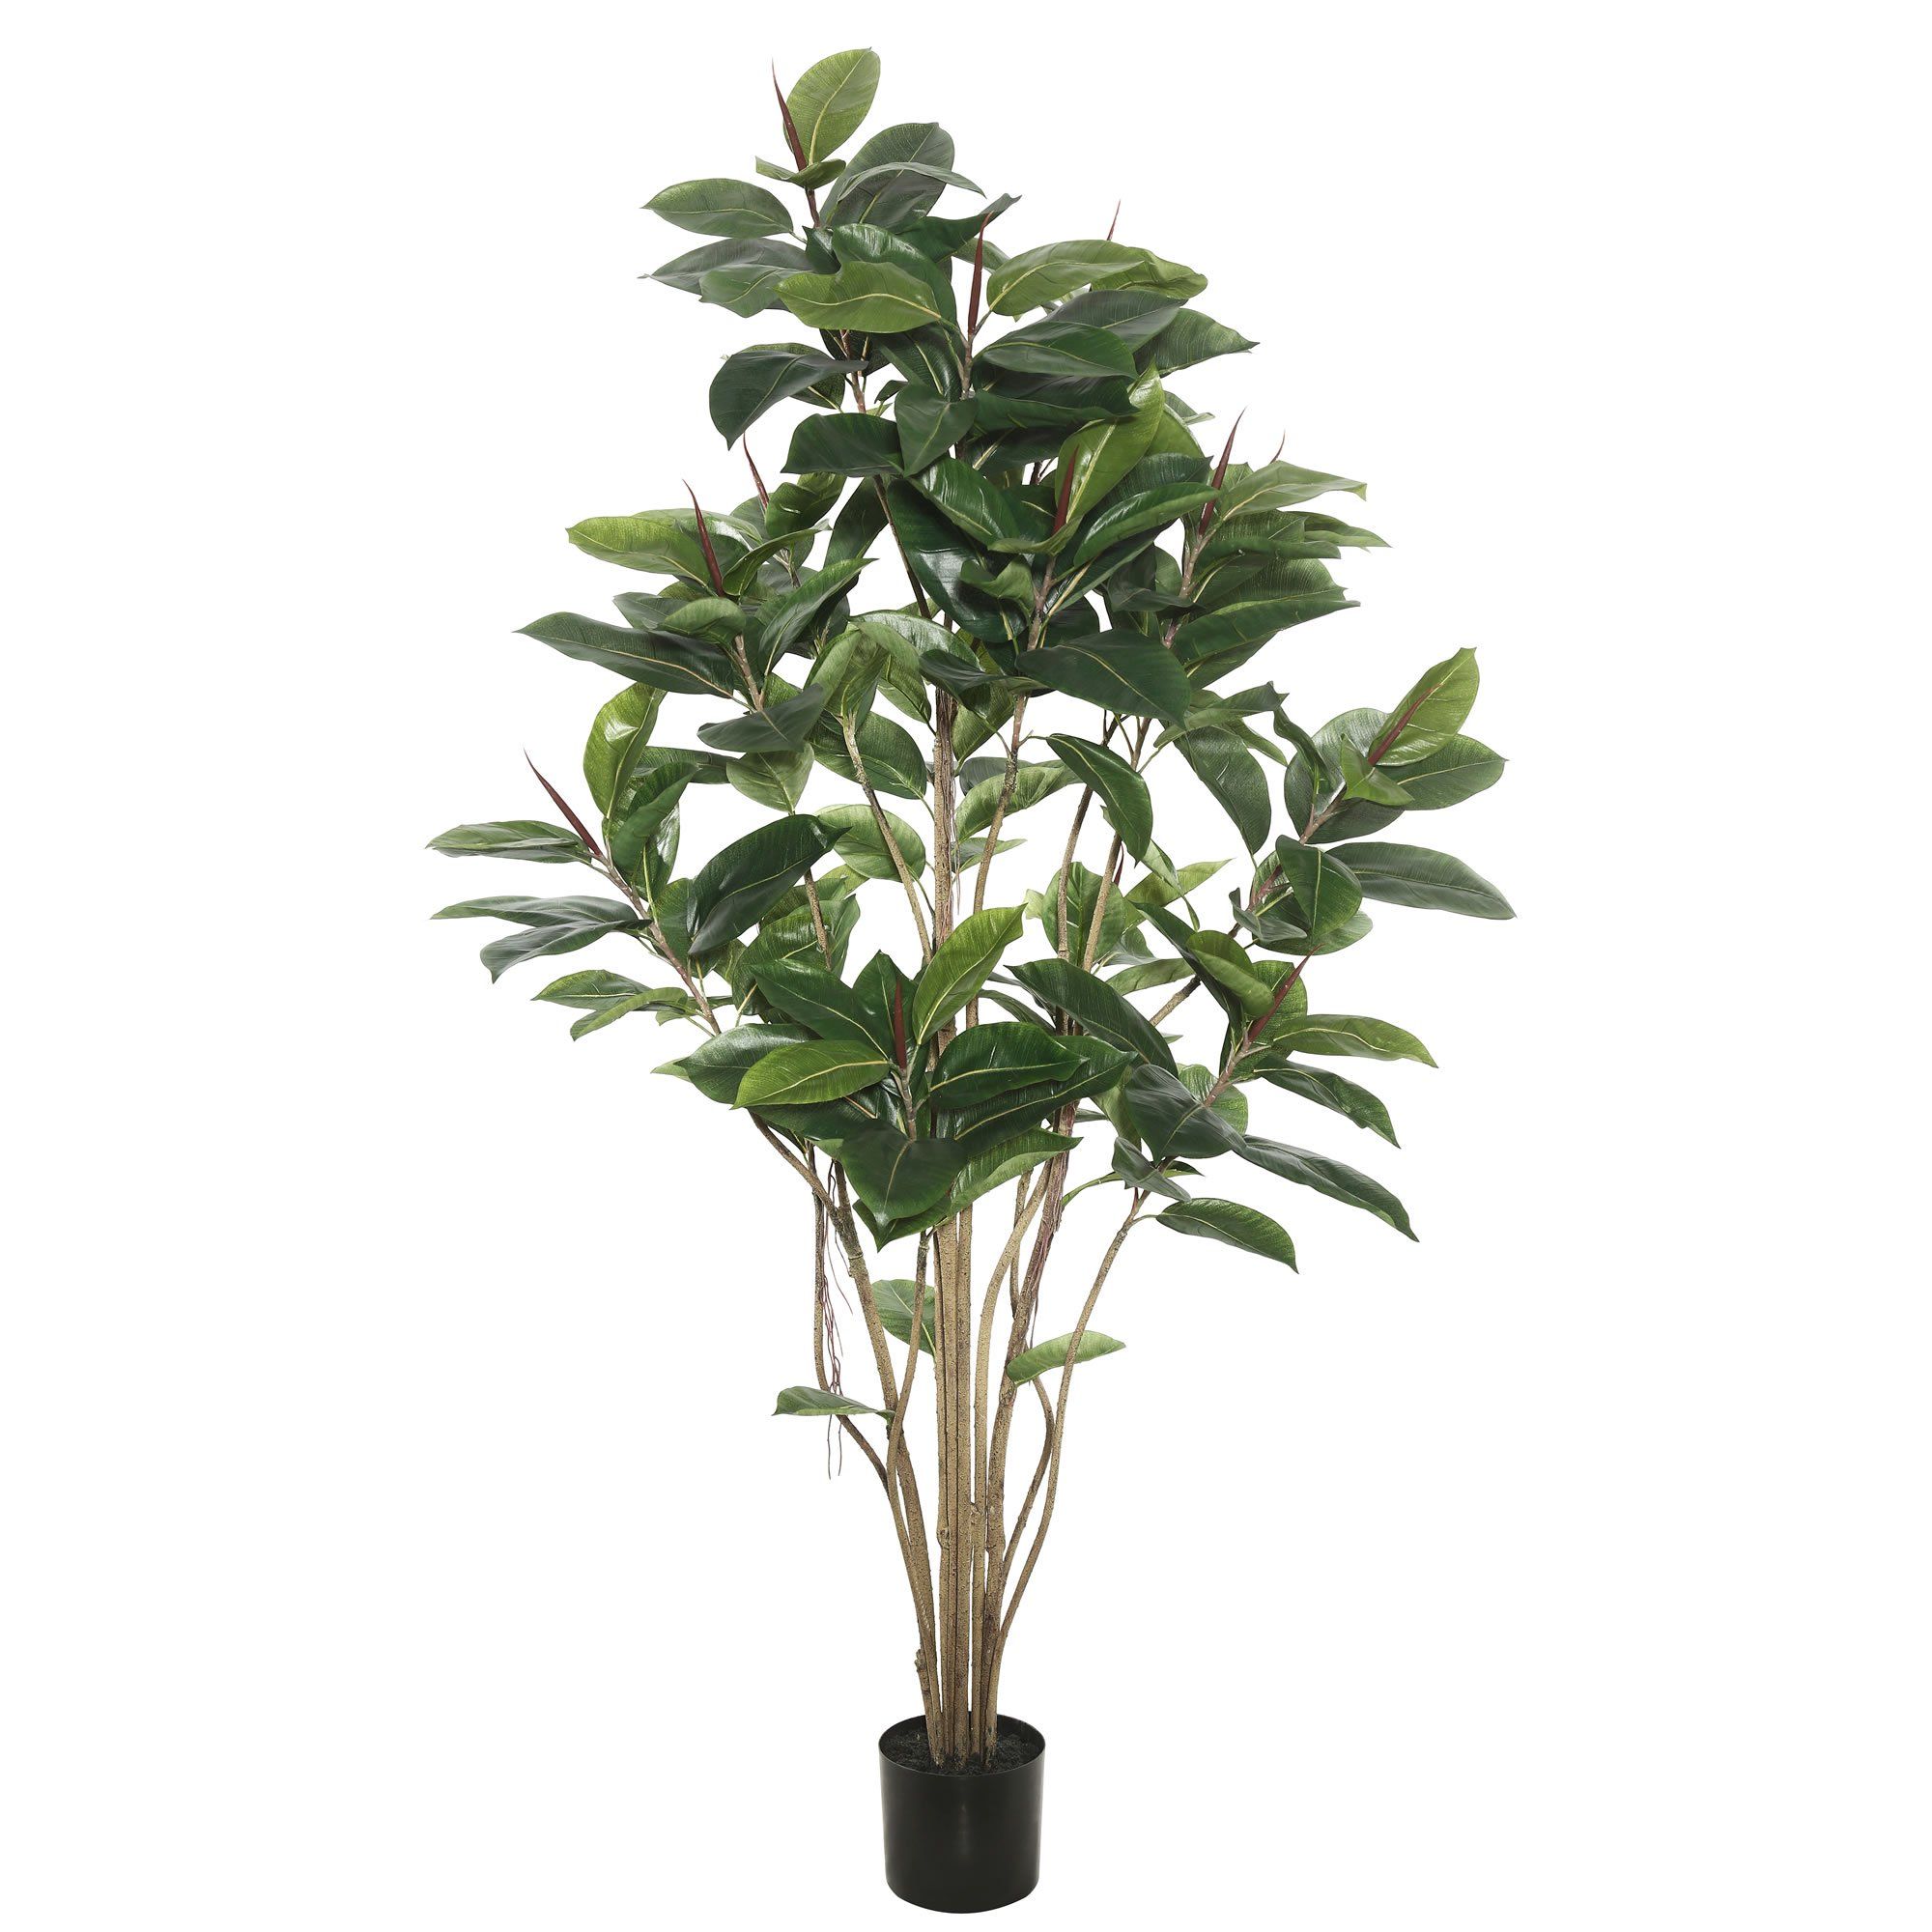 Vickerman 5' Potted Artificial Green Rubber Tree Features 132 Leaves | Walmart (US)